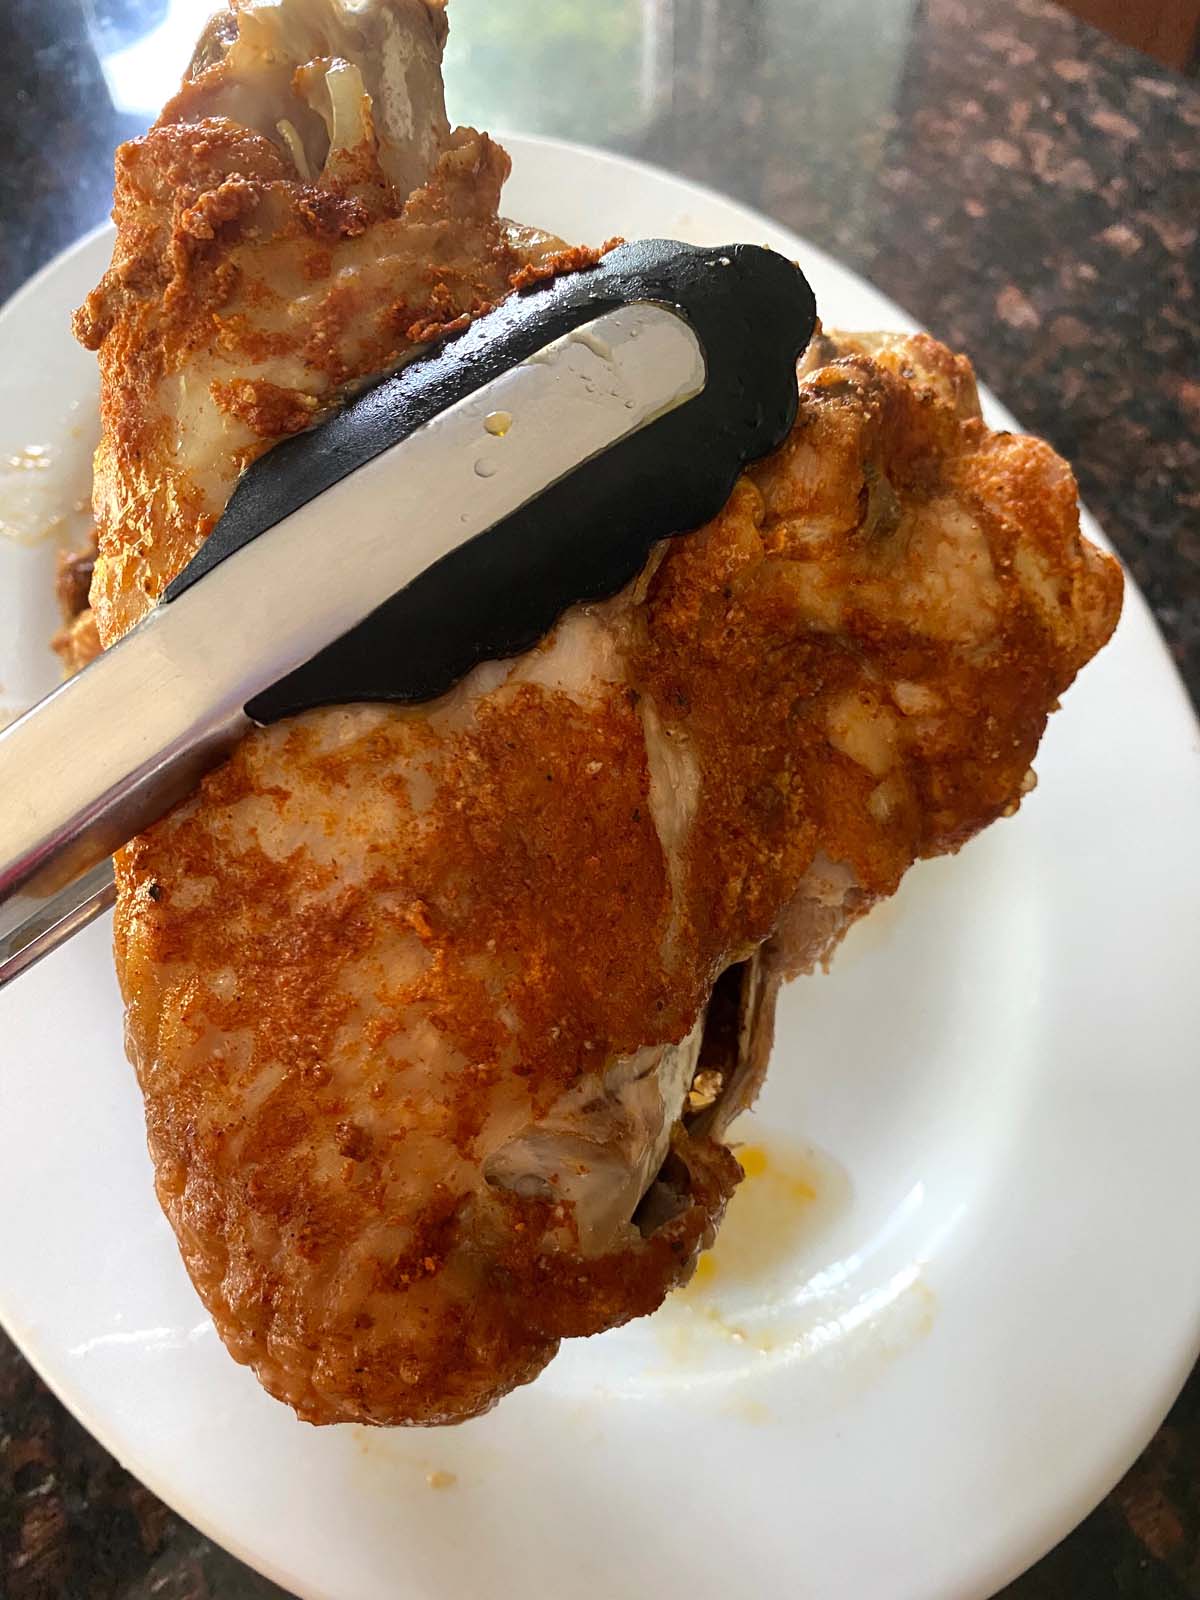 tongs holding a cooked and seasoned turkey wing